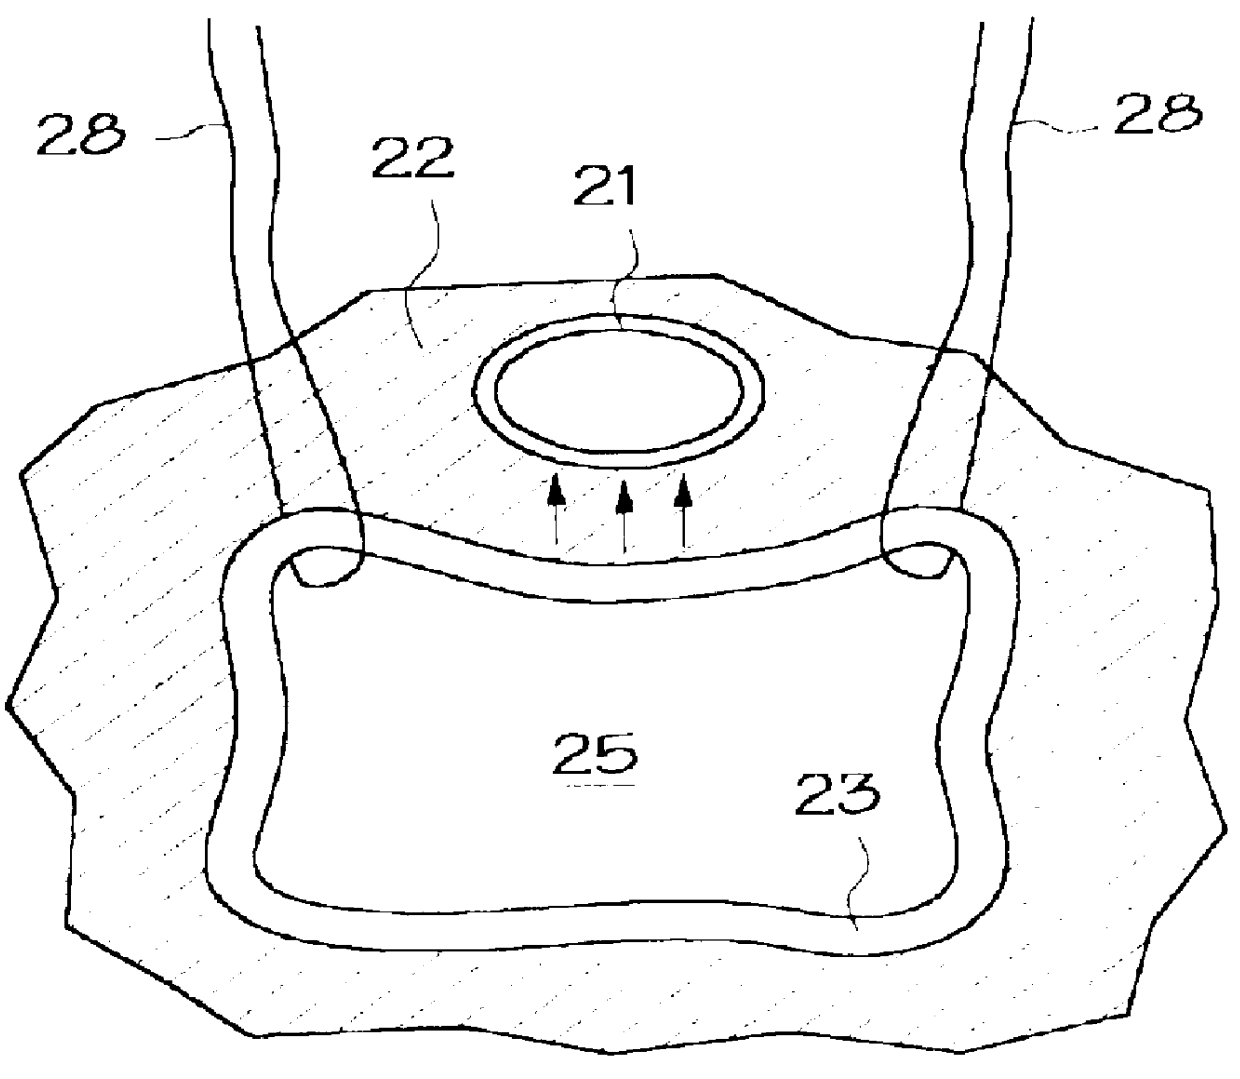 Intraurethral pressure monitoring assembly and method of treating incontinence using same